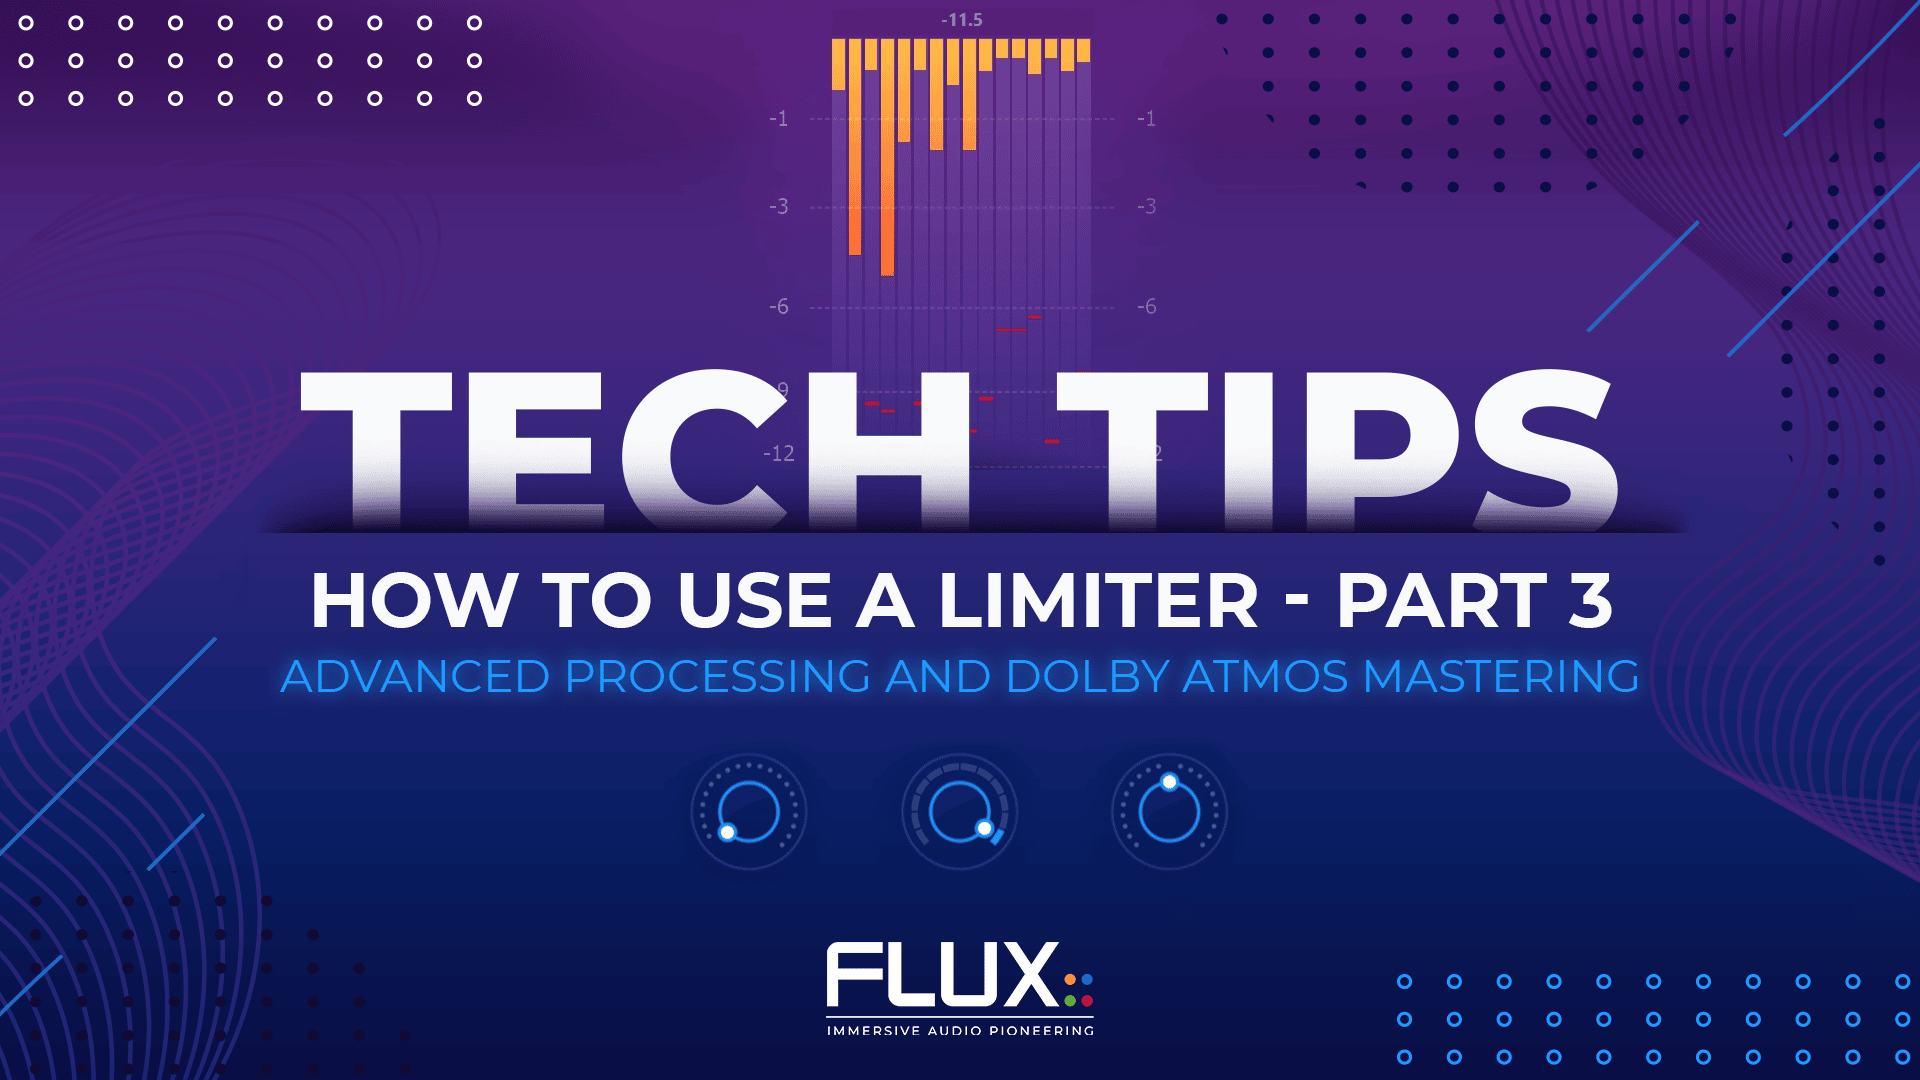 Tech Tips - How To Use A Limiter